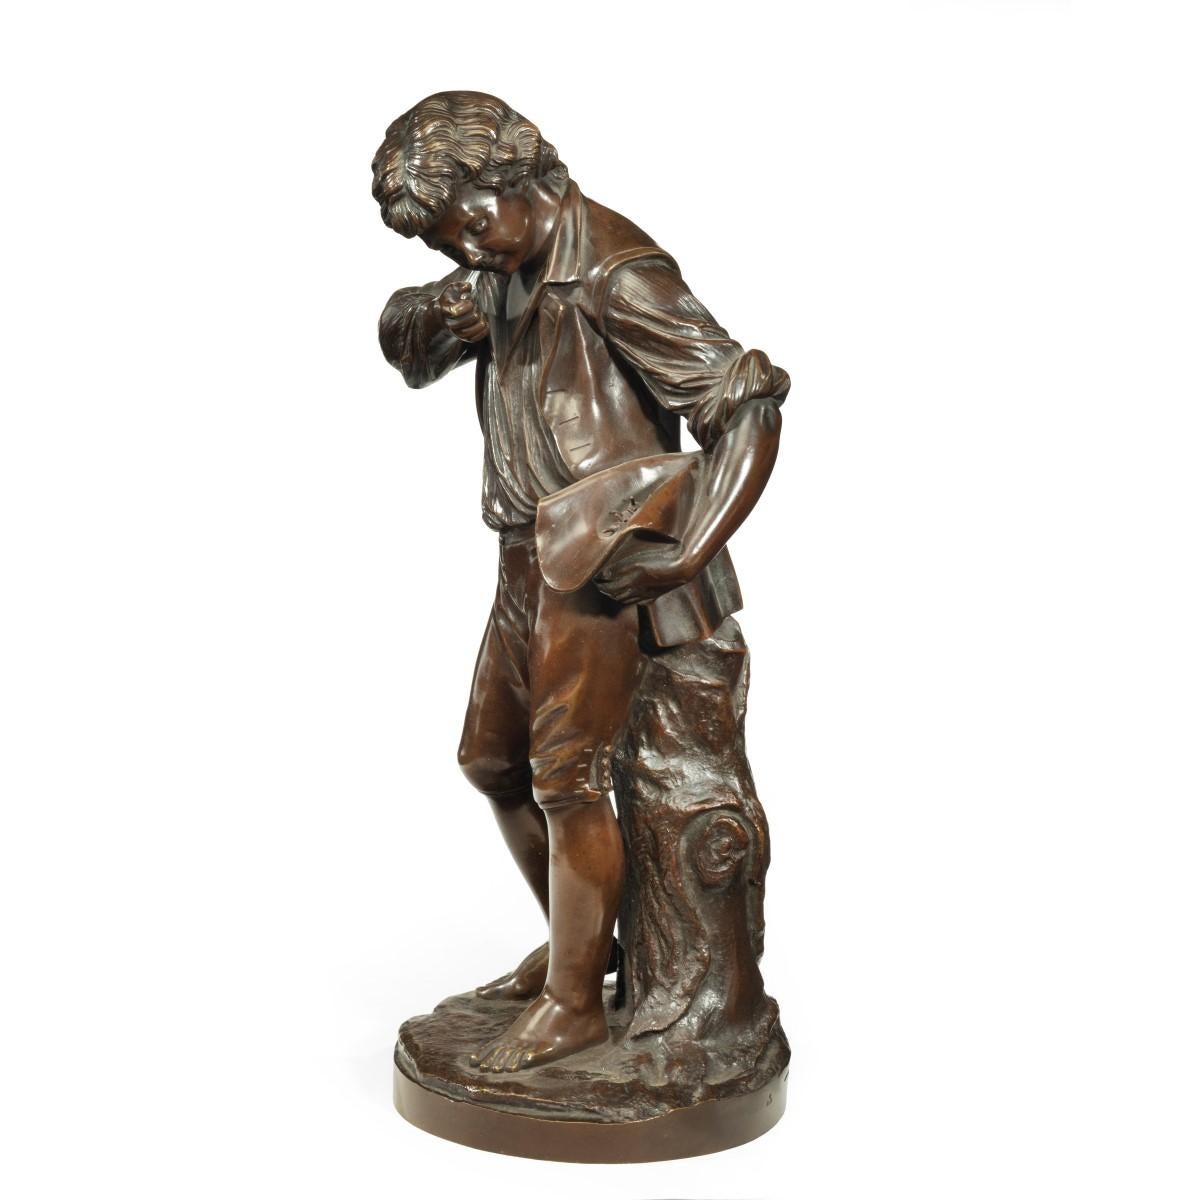 A bronze study of a boy collecting fruit in his wide brimmed hat, he is wearing a jerkin and breeches over a shirt rolled up at the sleeves, with one hand to his mouth and the other holding his upturned hat in which he has collected the fruit,